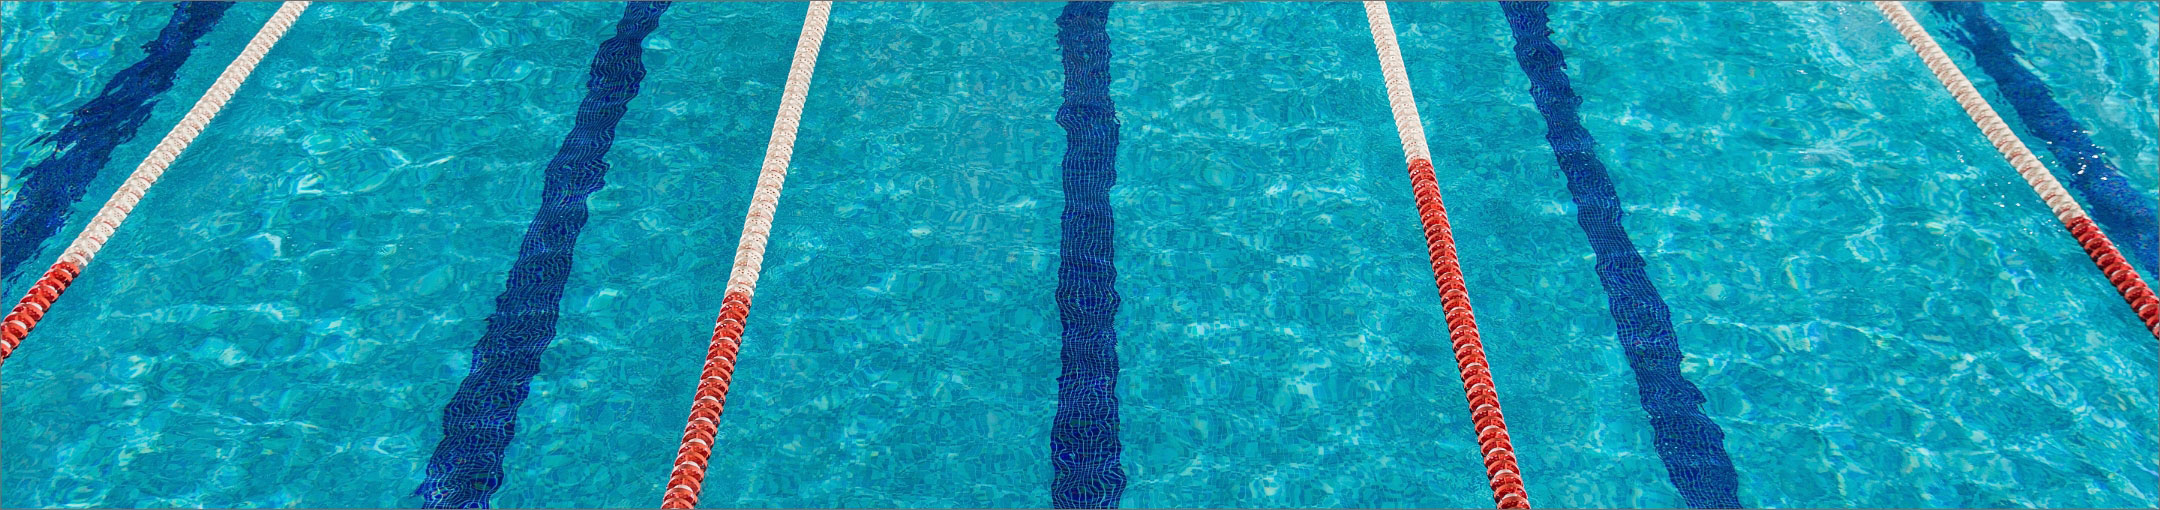 a pool with racing lanes